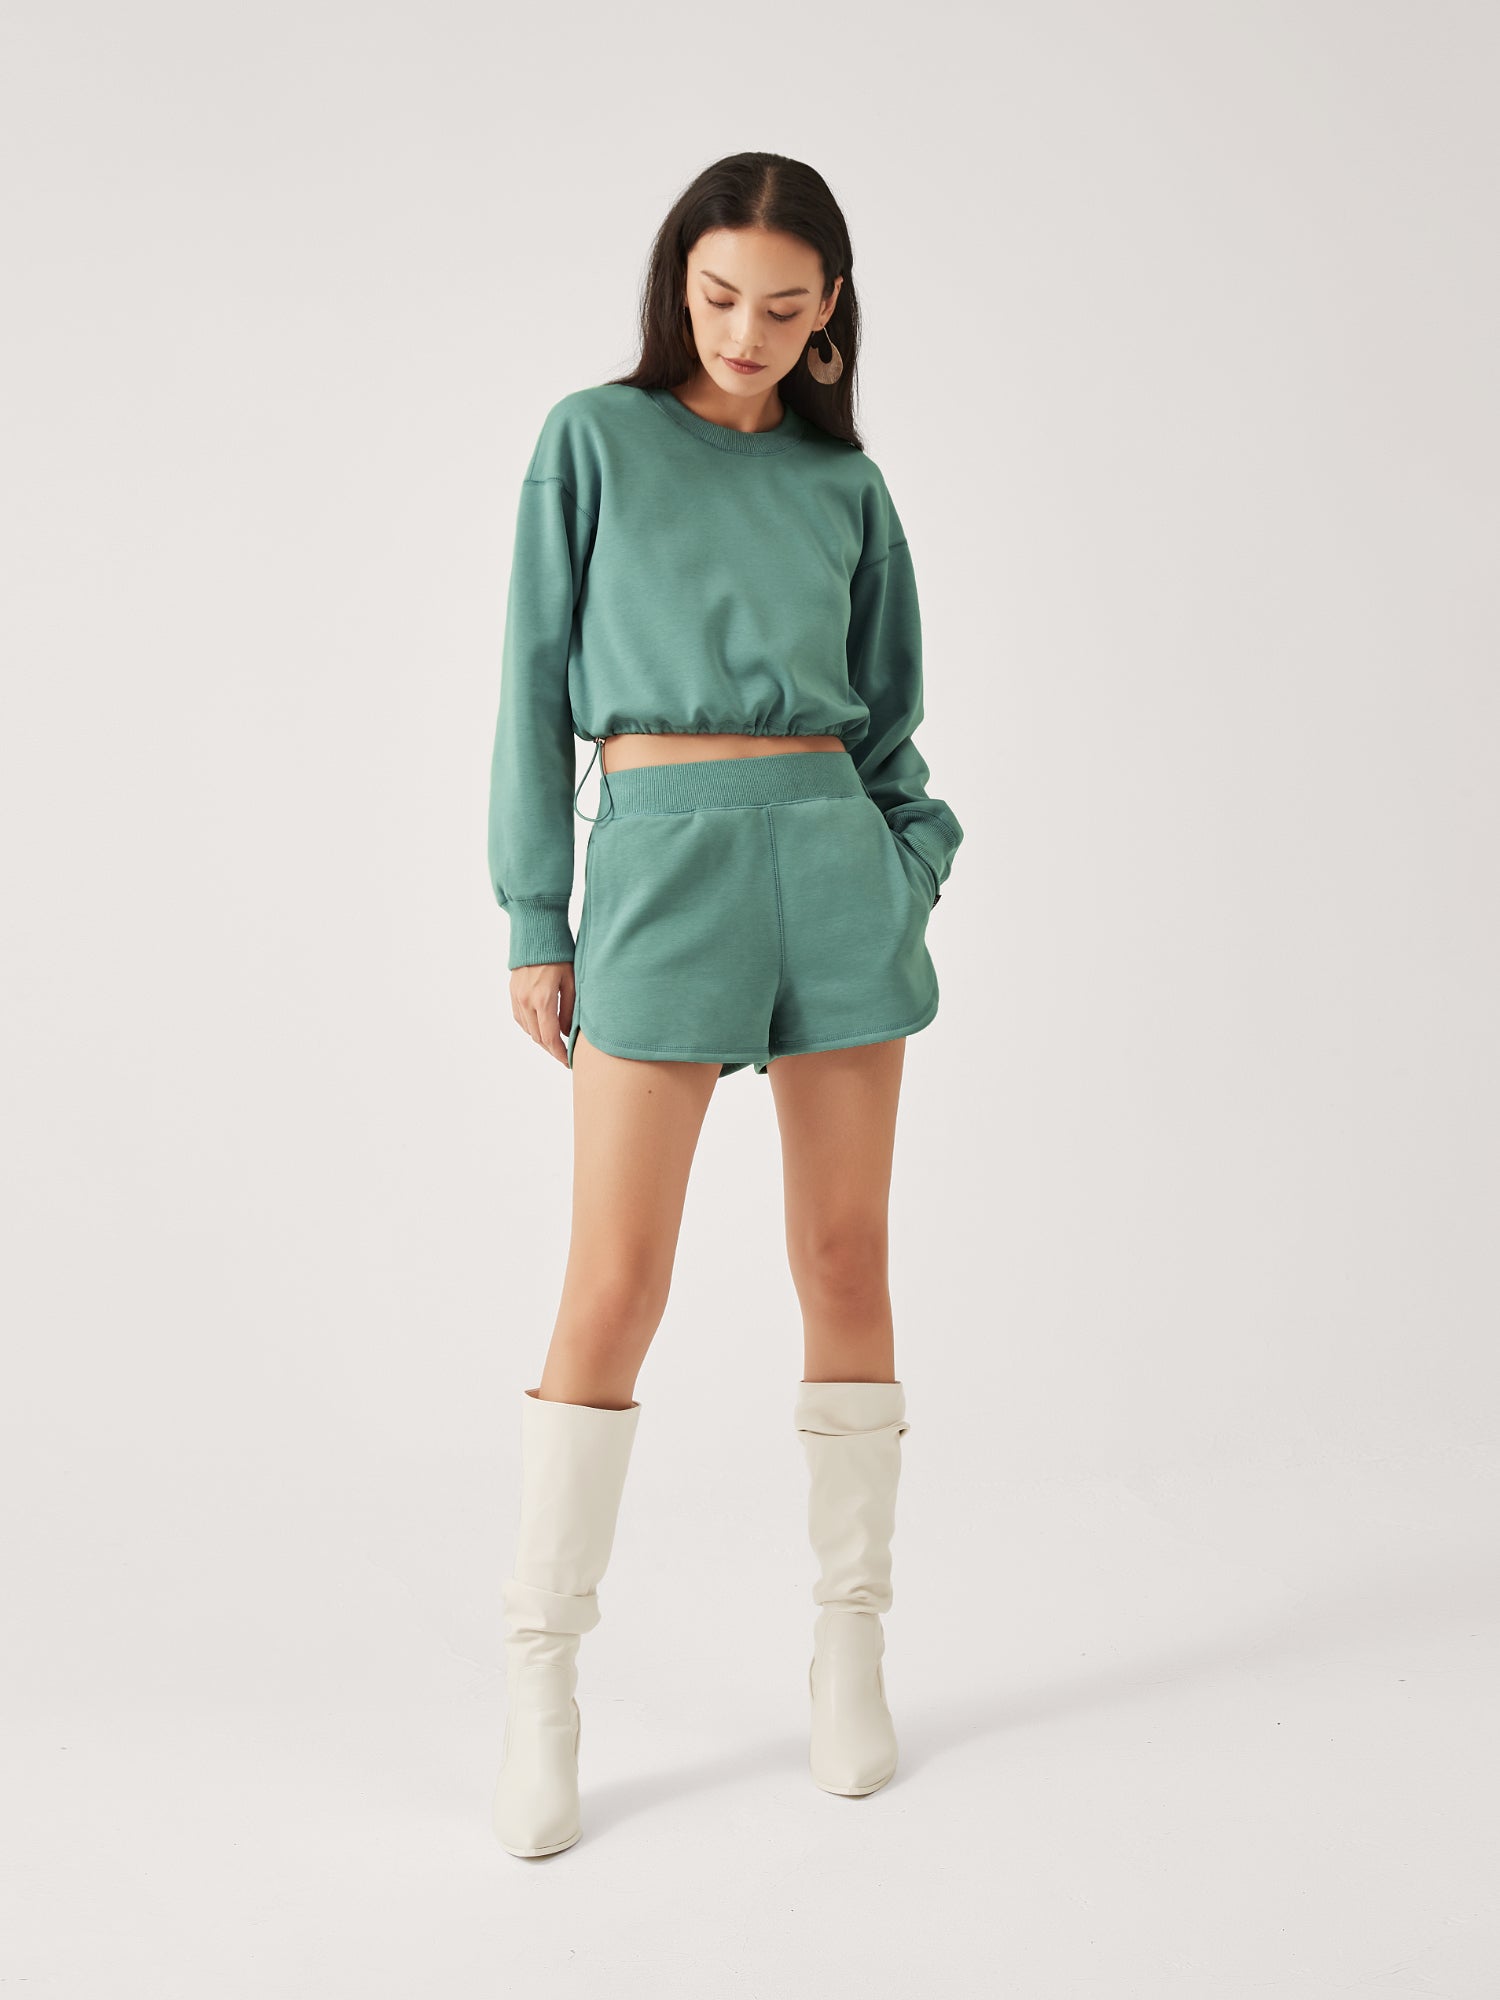 Cubby Sweater, Cropped